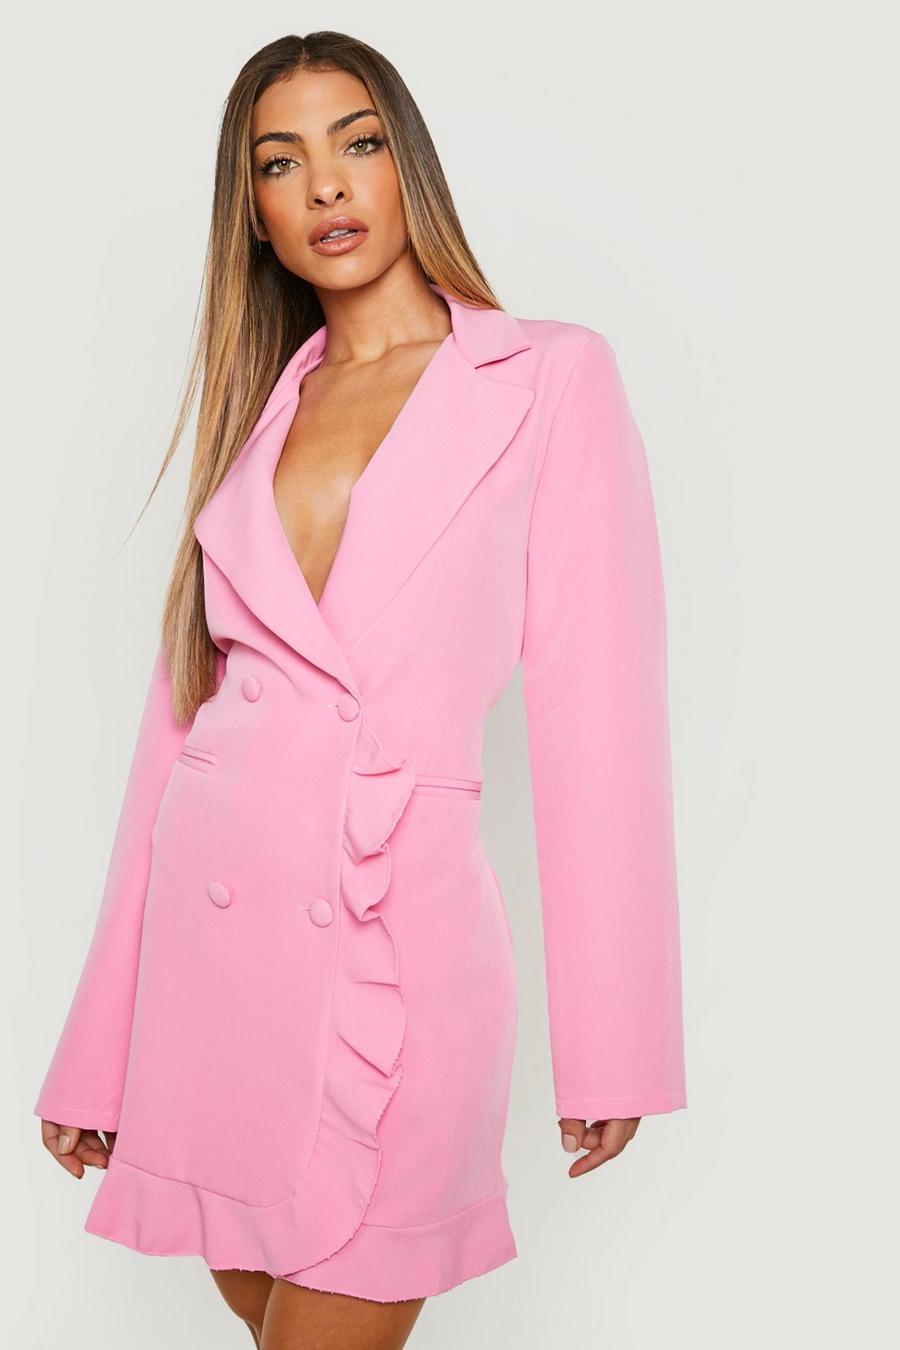 Candy pink rose Frill Detail Double Breasted Blazer Dress